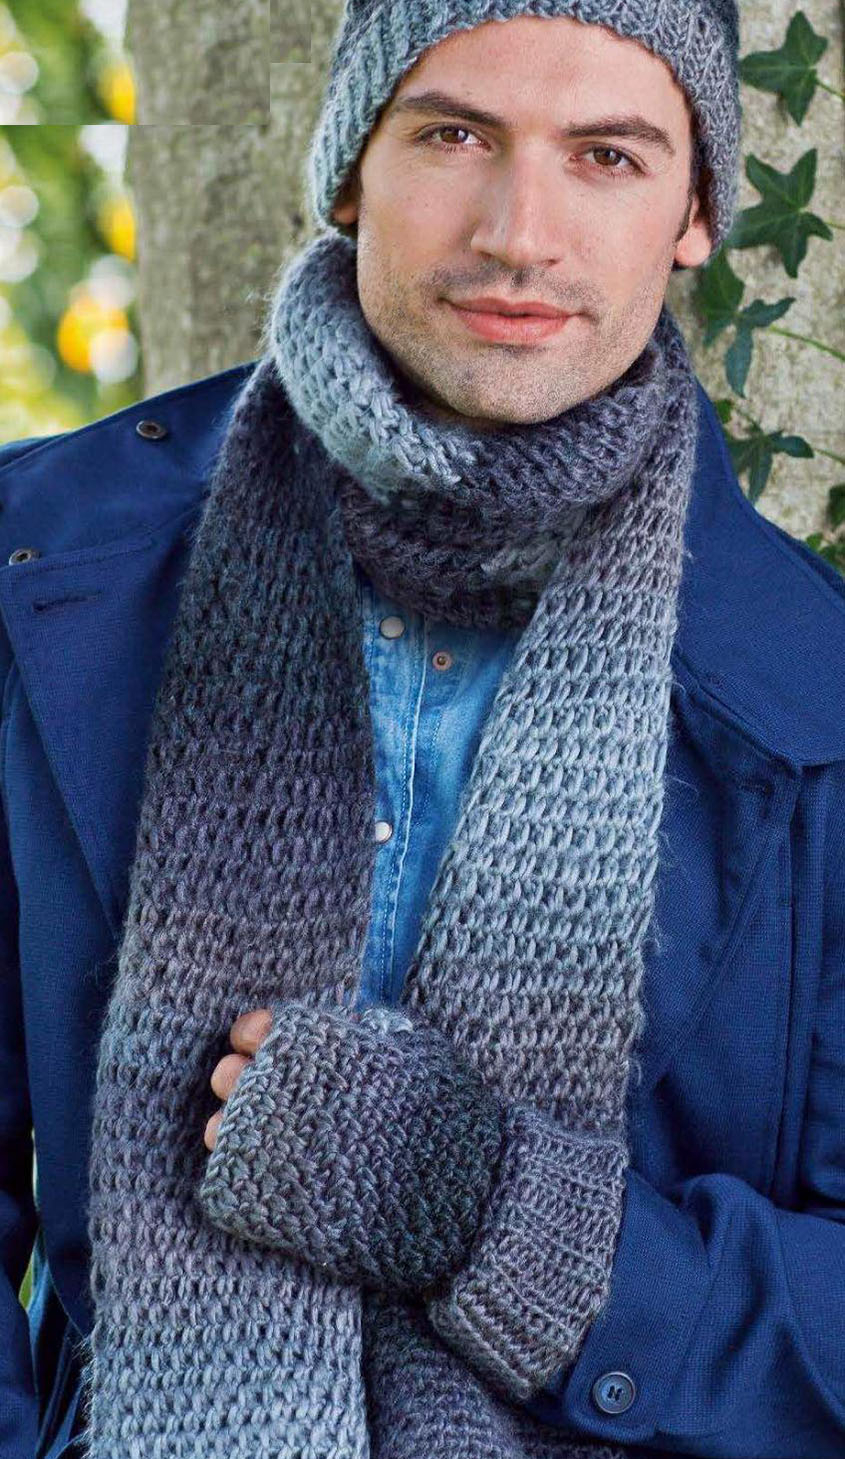 Crocheted Hats And Scarves Mens Hat Scarf And Mitts Set - mecrochet.com